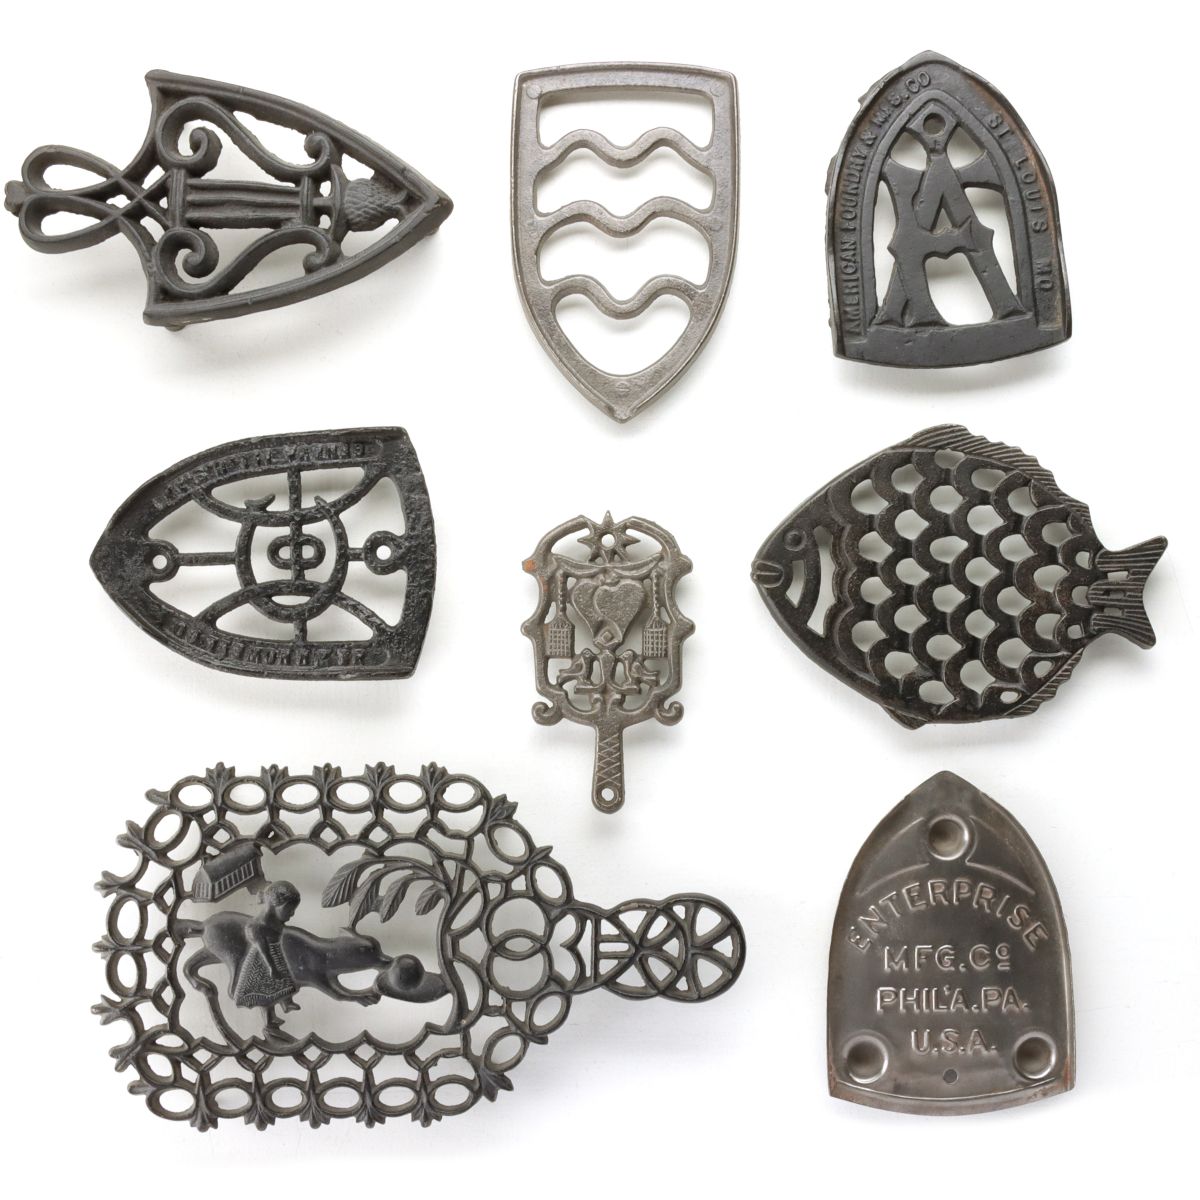 A COLLECTION OF FANCY PRESSING IRON TRIVETS